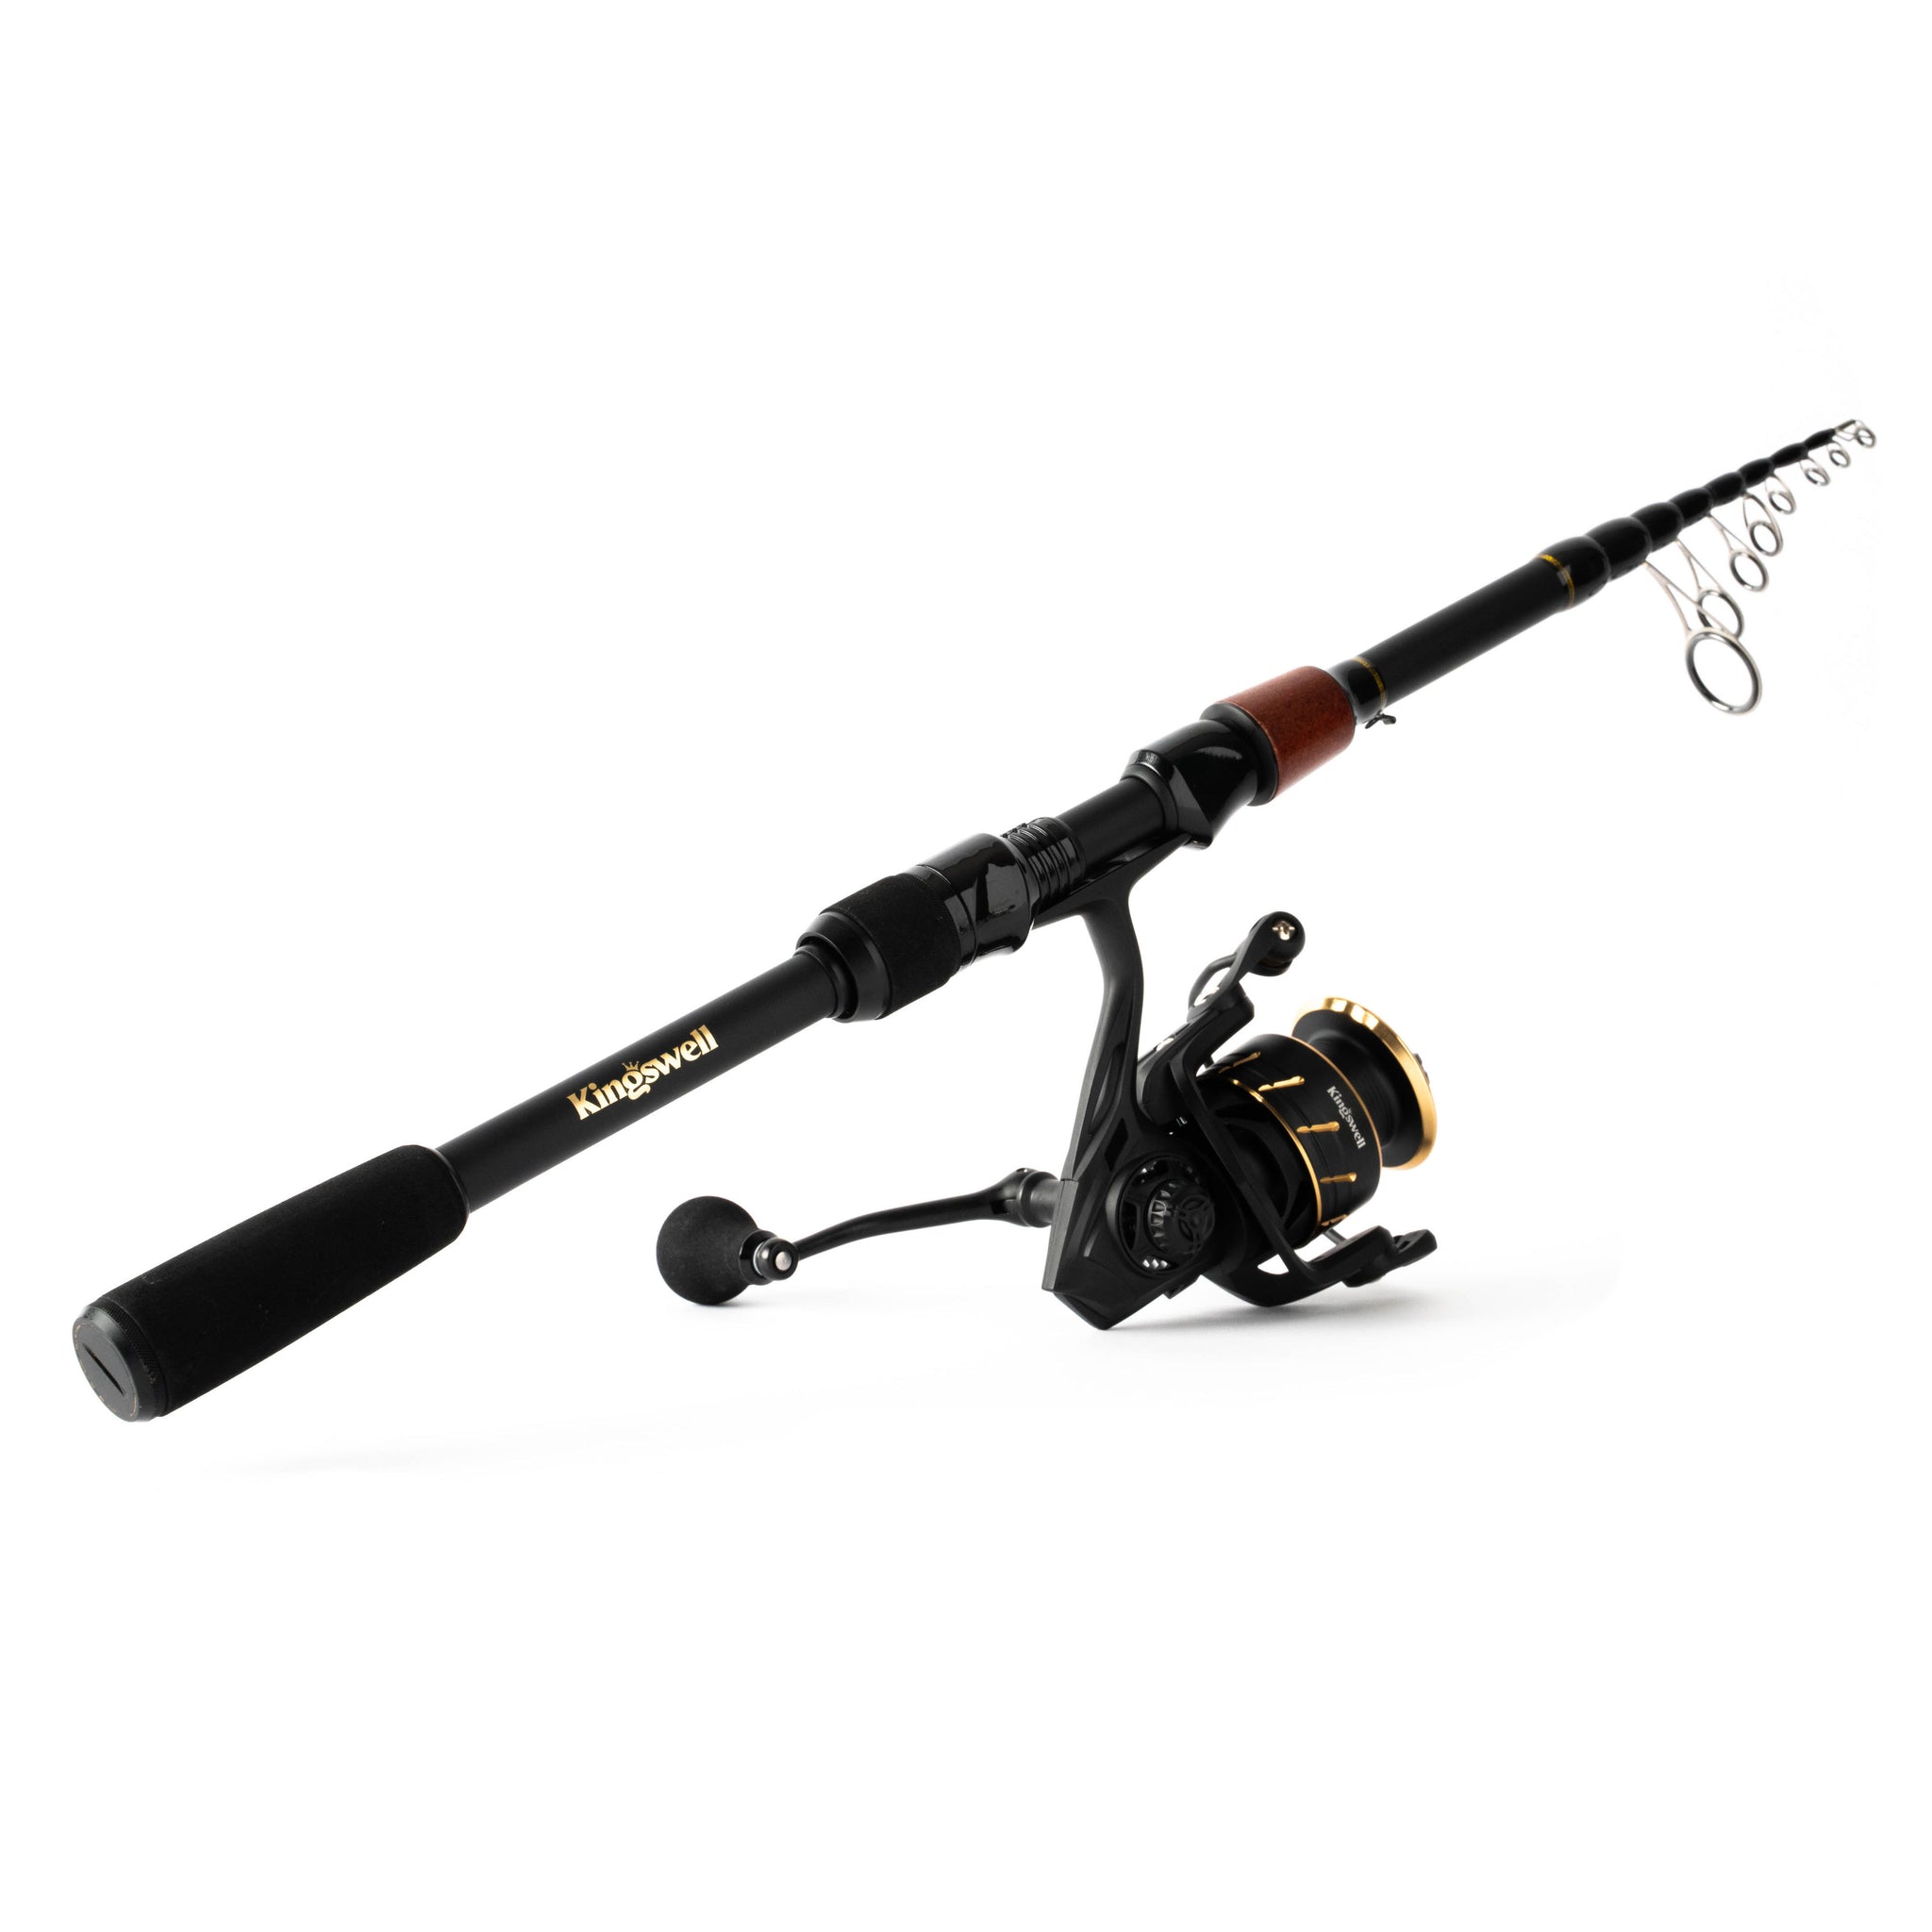 Adventure Kings Travel Rod and Reel Combo - Expert Rigging and Set-Up Tips!  